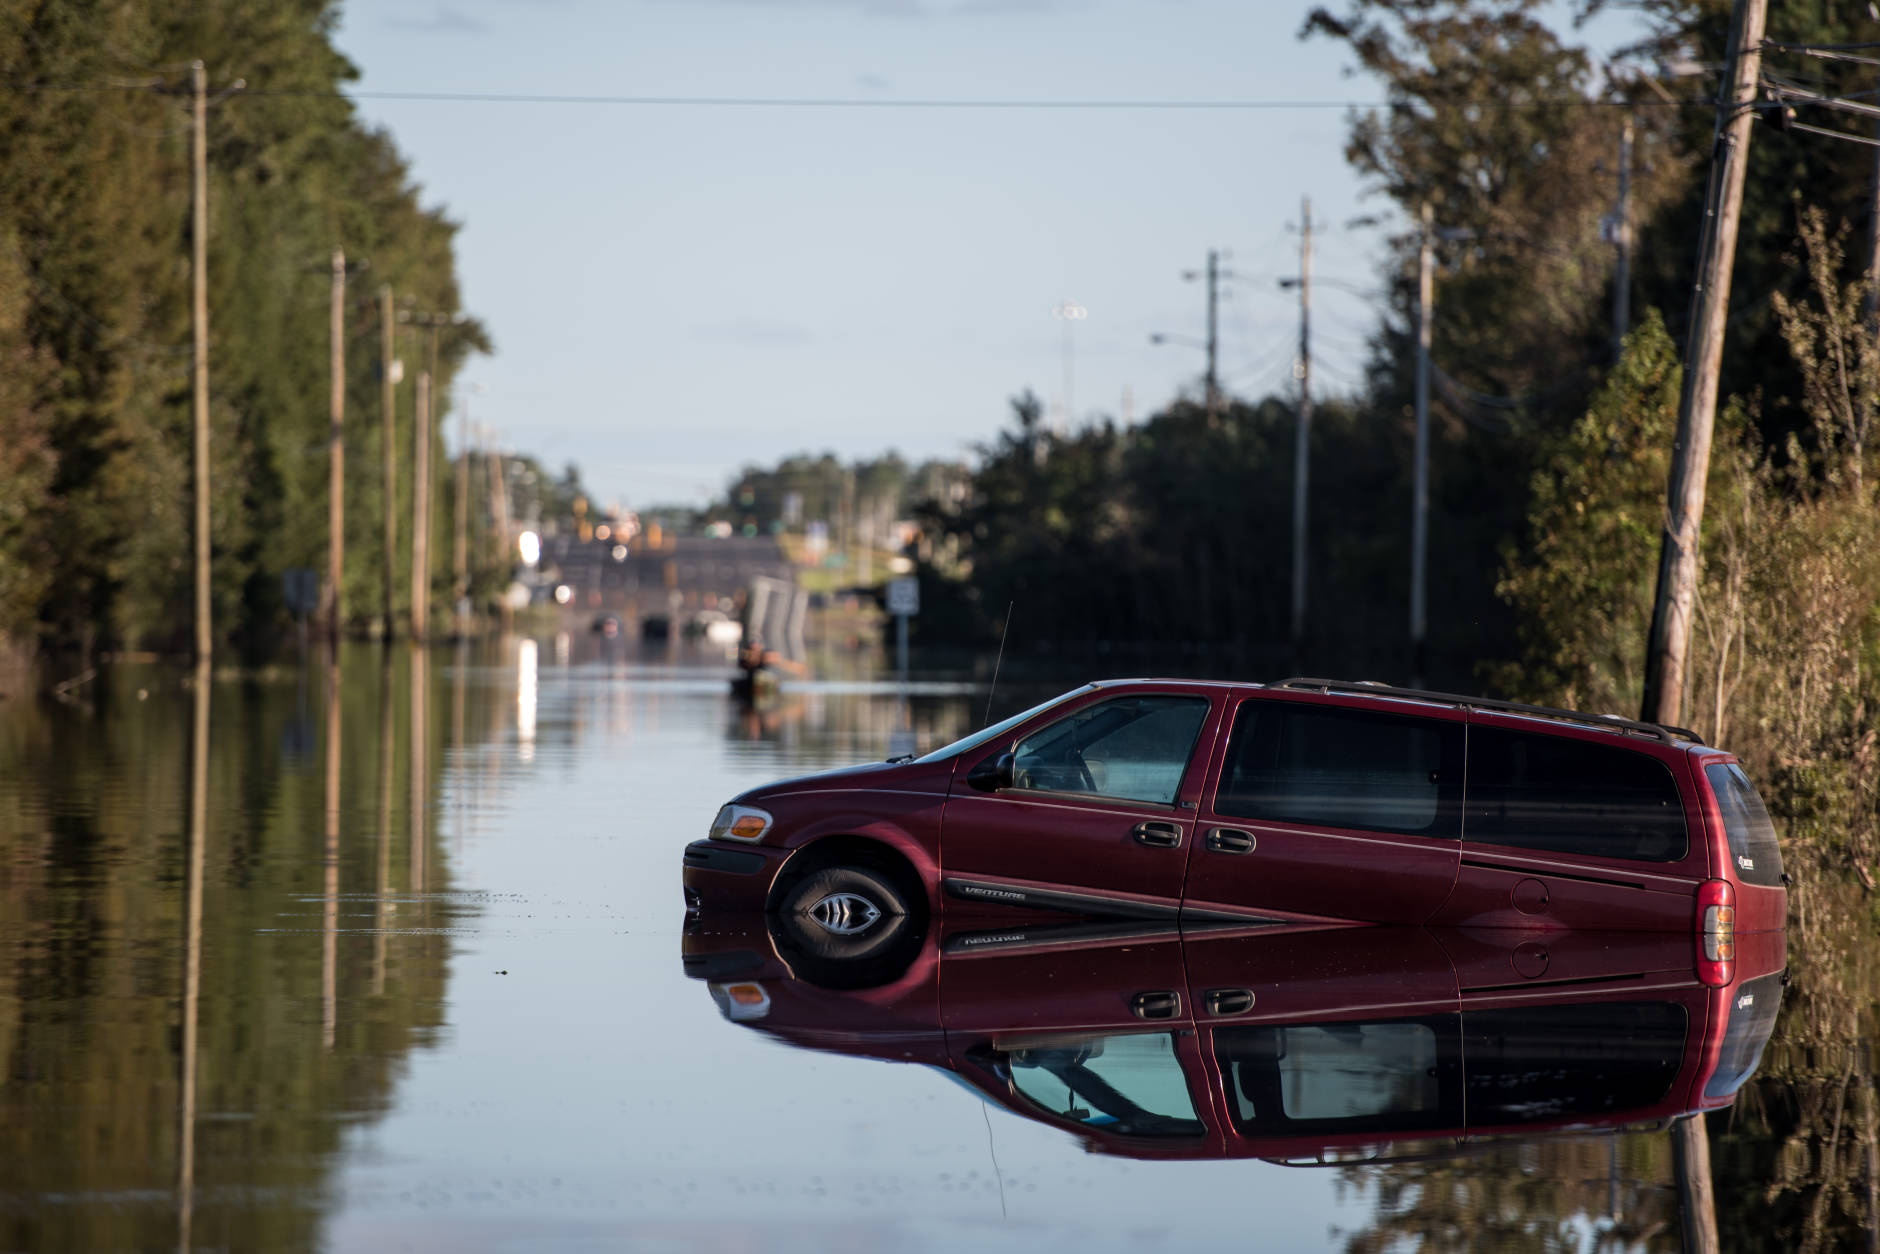 LUMBERTON, NC - OCTOBER 12: A vehicle is partially submerged by floodwaters from the Lumber River on October 12, 2016 in Lumberton, North Carolina. Hurricane Matthew's heavy rains ended over the weekend, but flooding is still expected for days in North Carolina. (Photo by Sean Rayford/Getty Images)